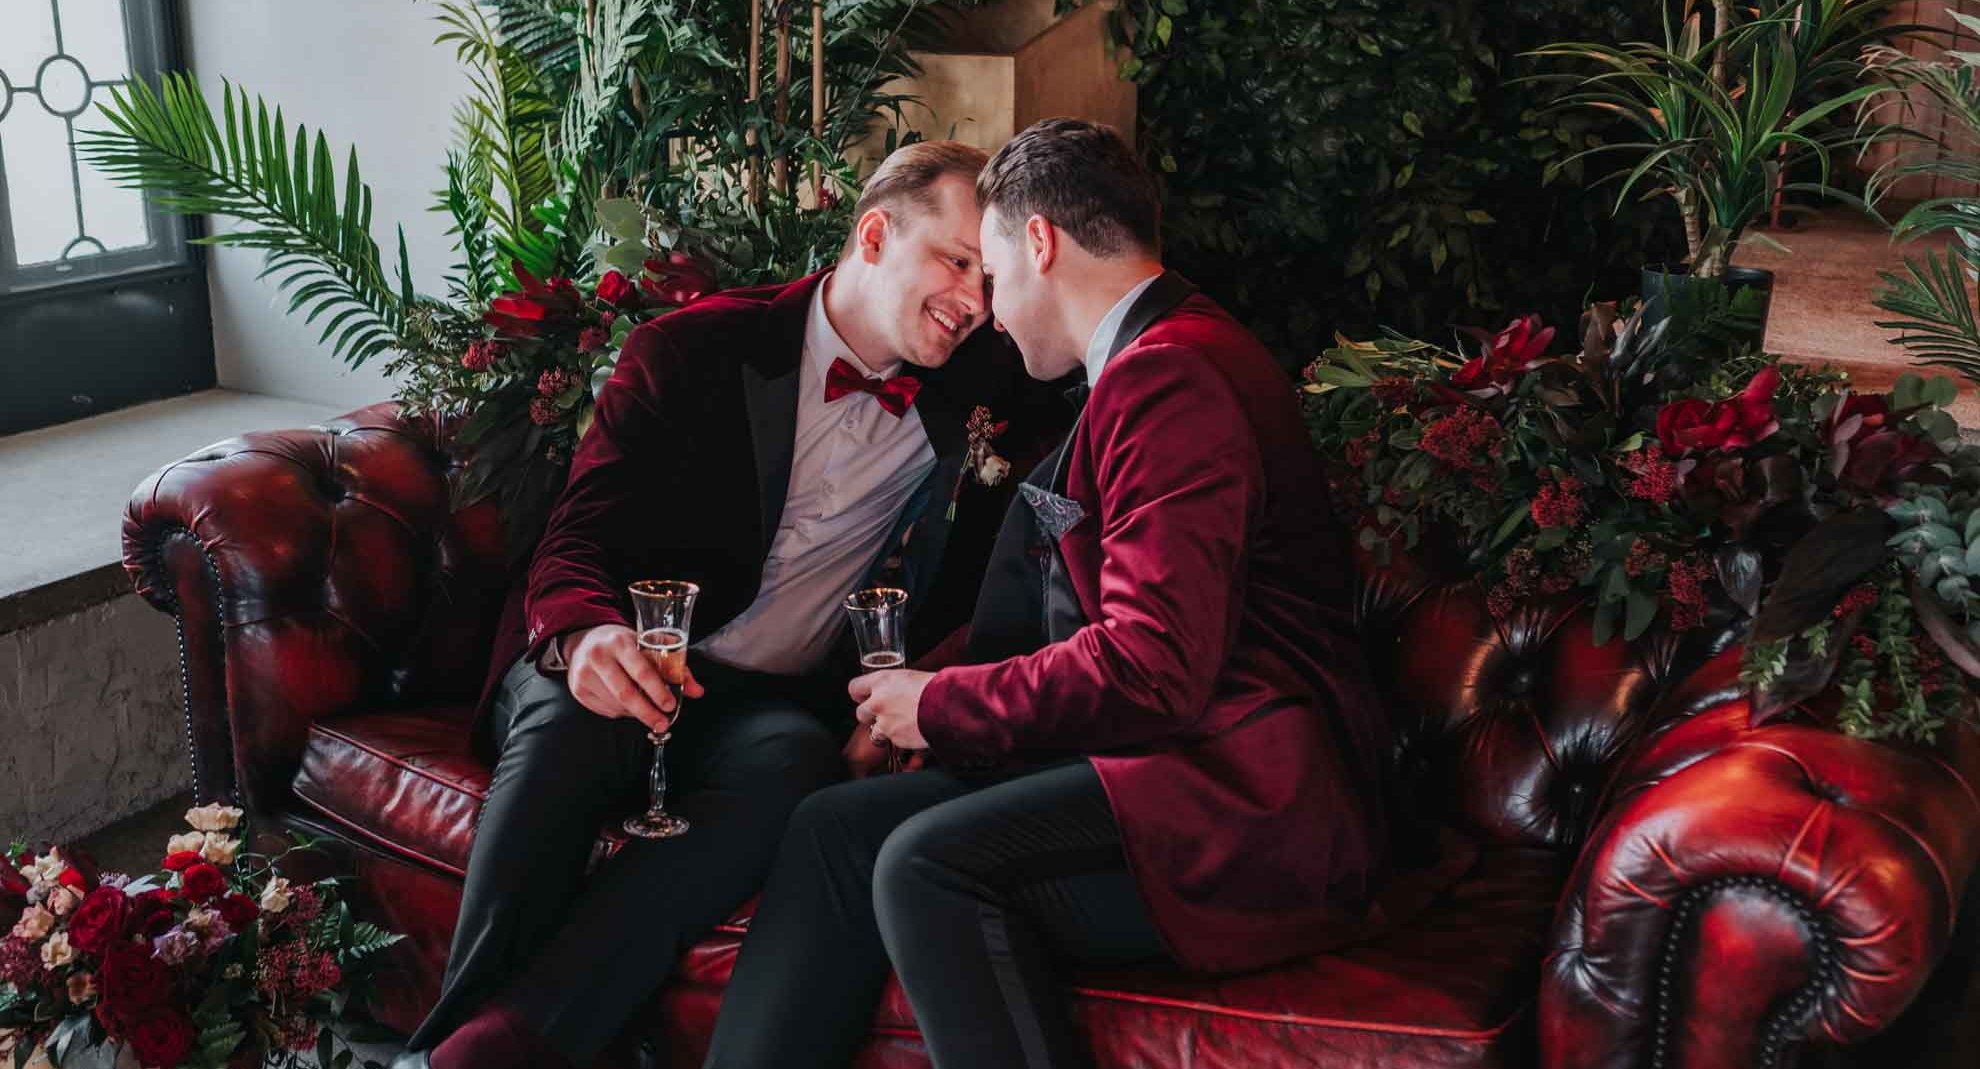 Phoebe Rossi Photography gay mr & mr queer LGBTQIA+ couple moody romantic wedding elopement Sussex United Kingdom Dancing With Them magazine (1)